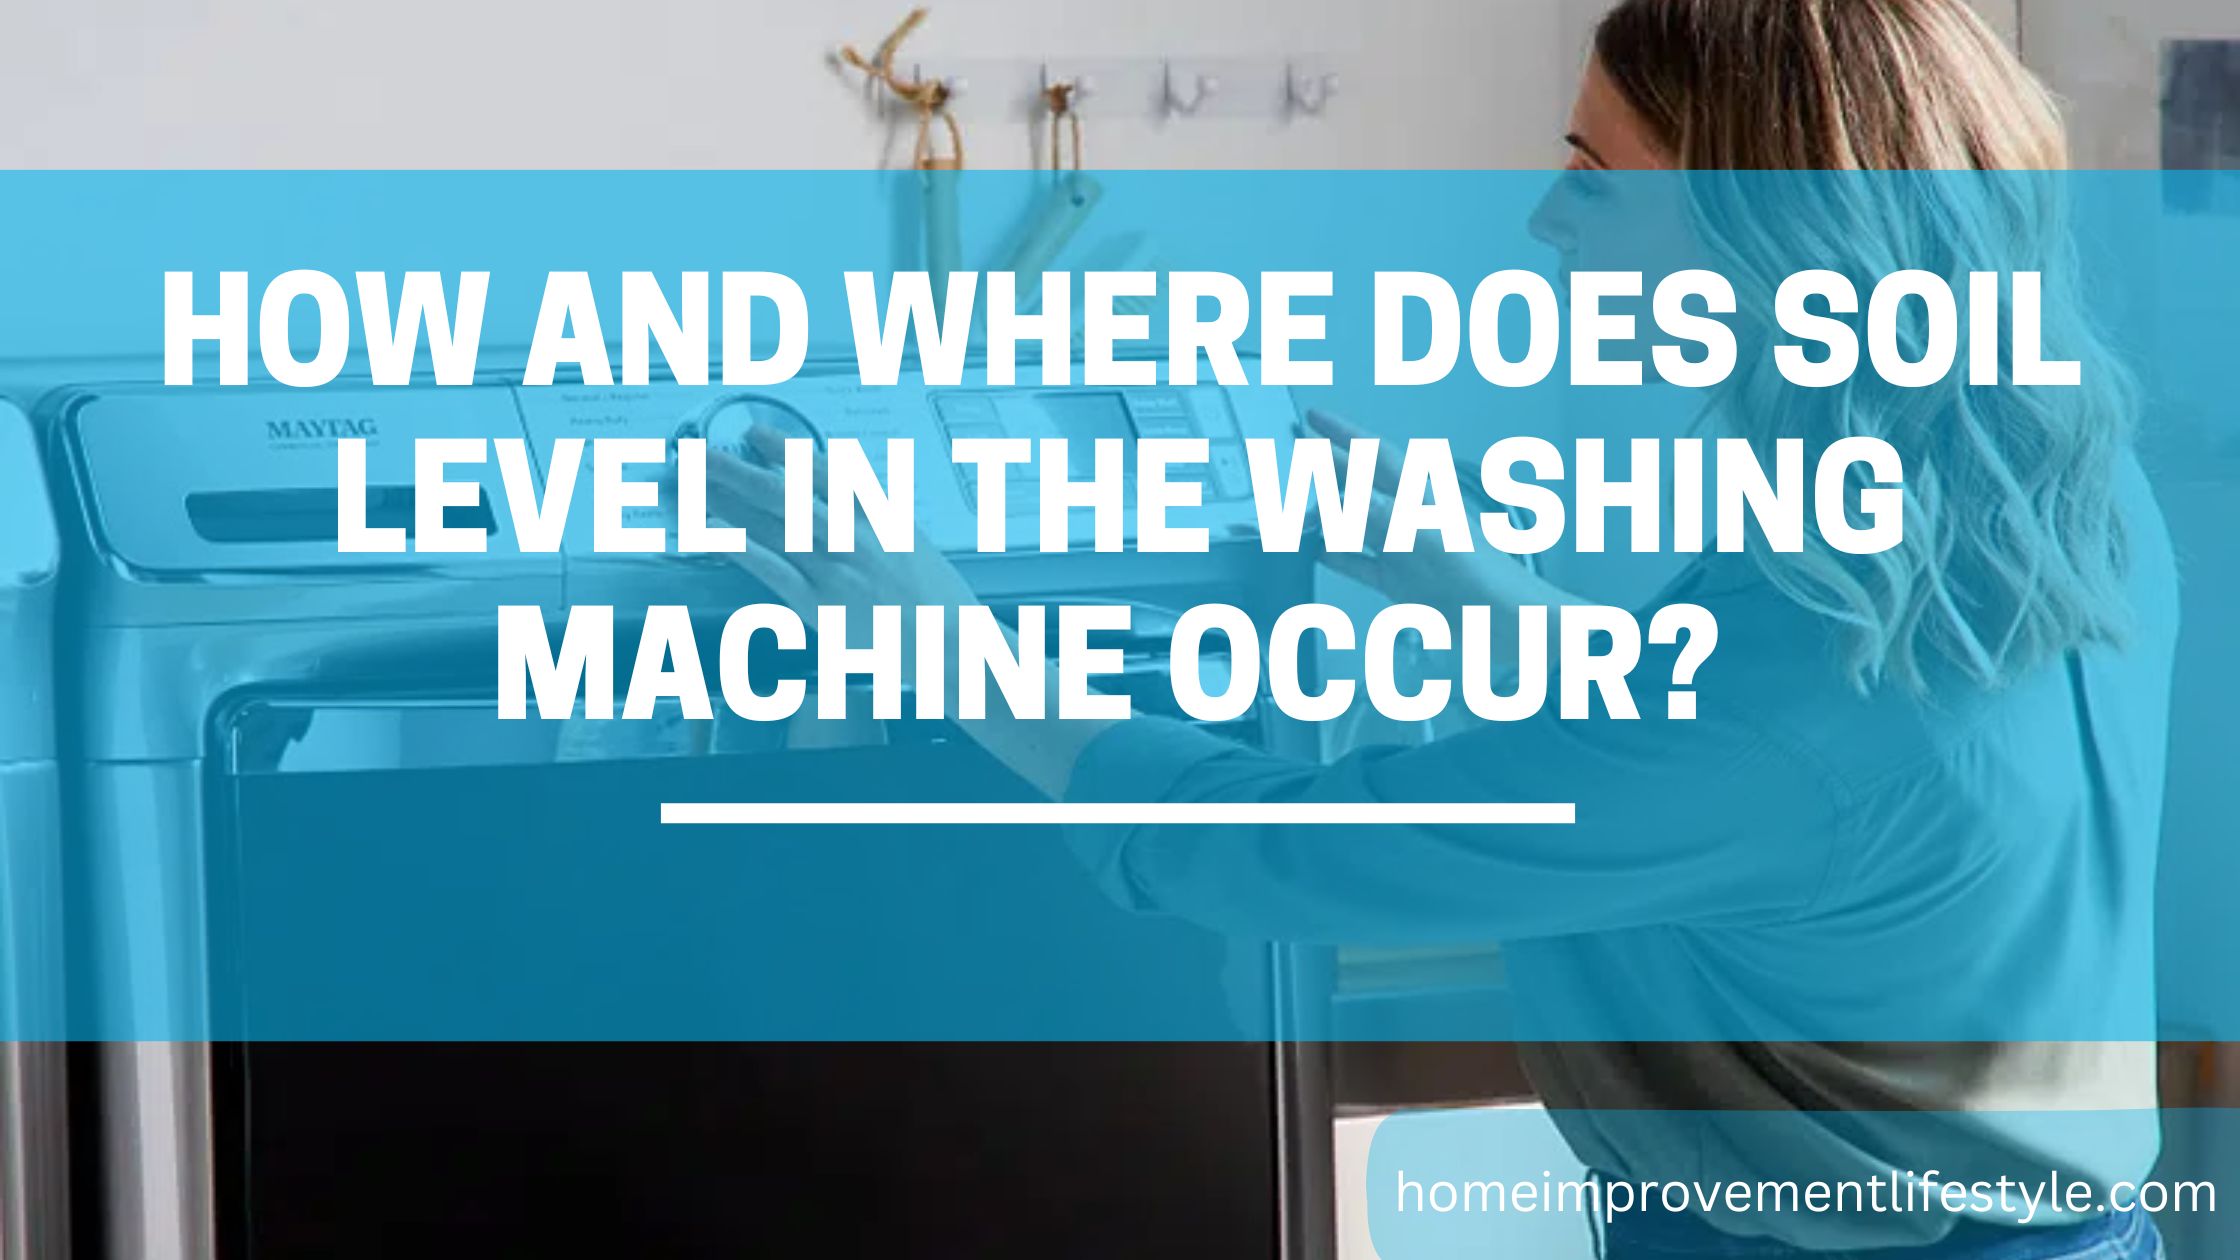 How and where does soil level in the washing machine occur?